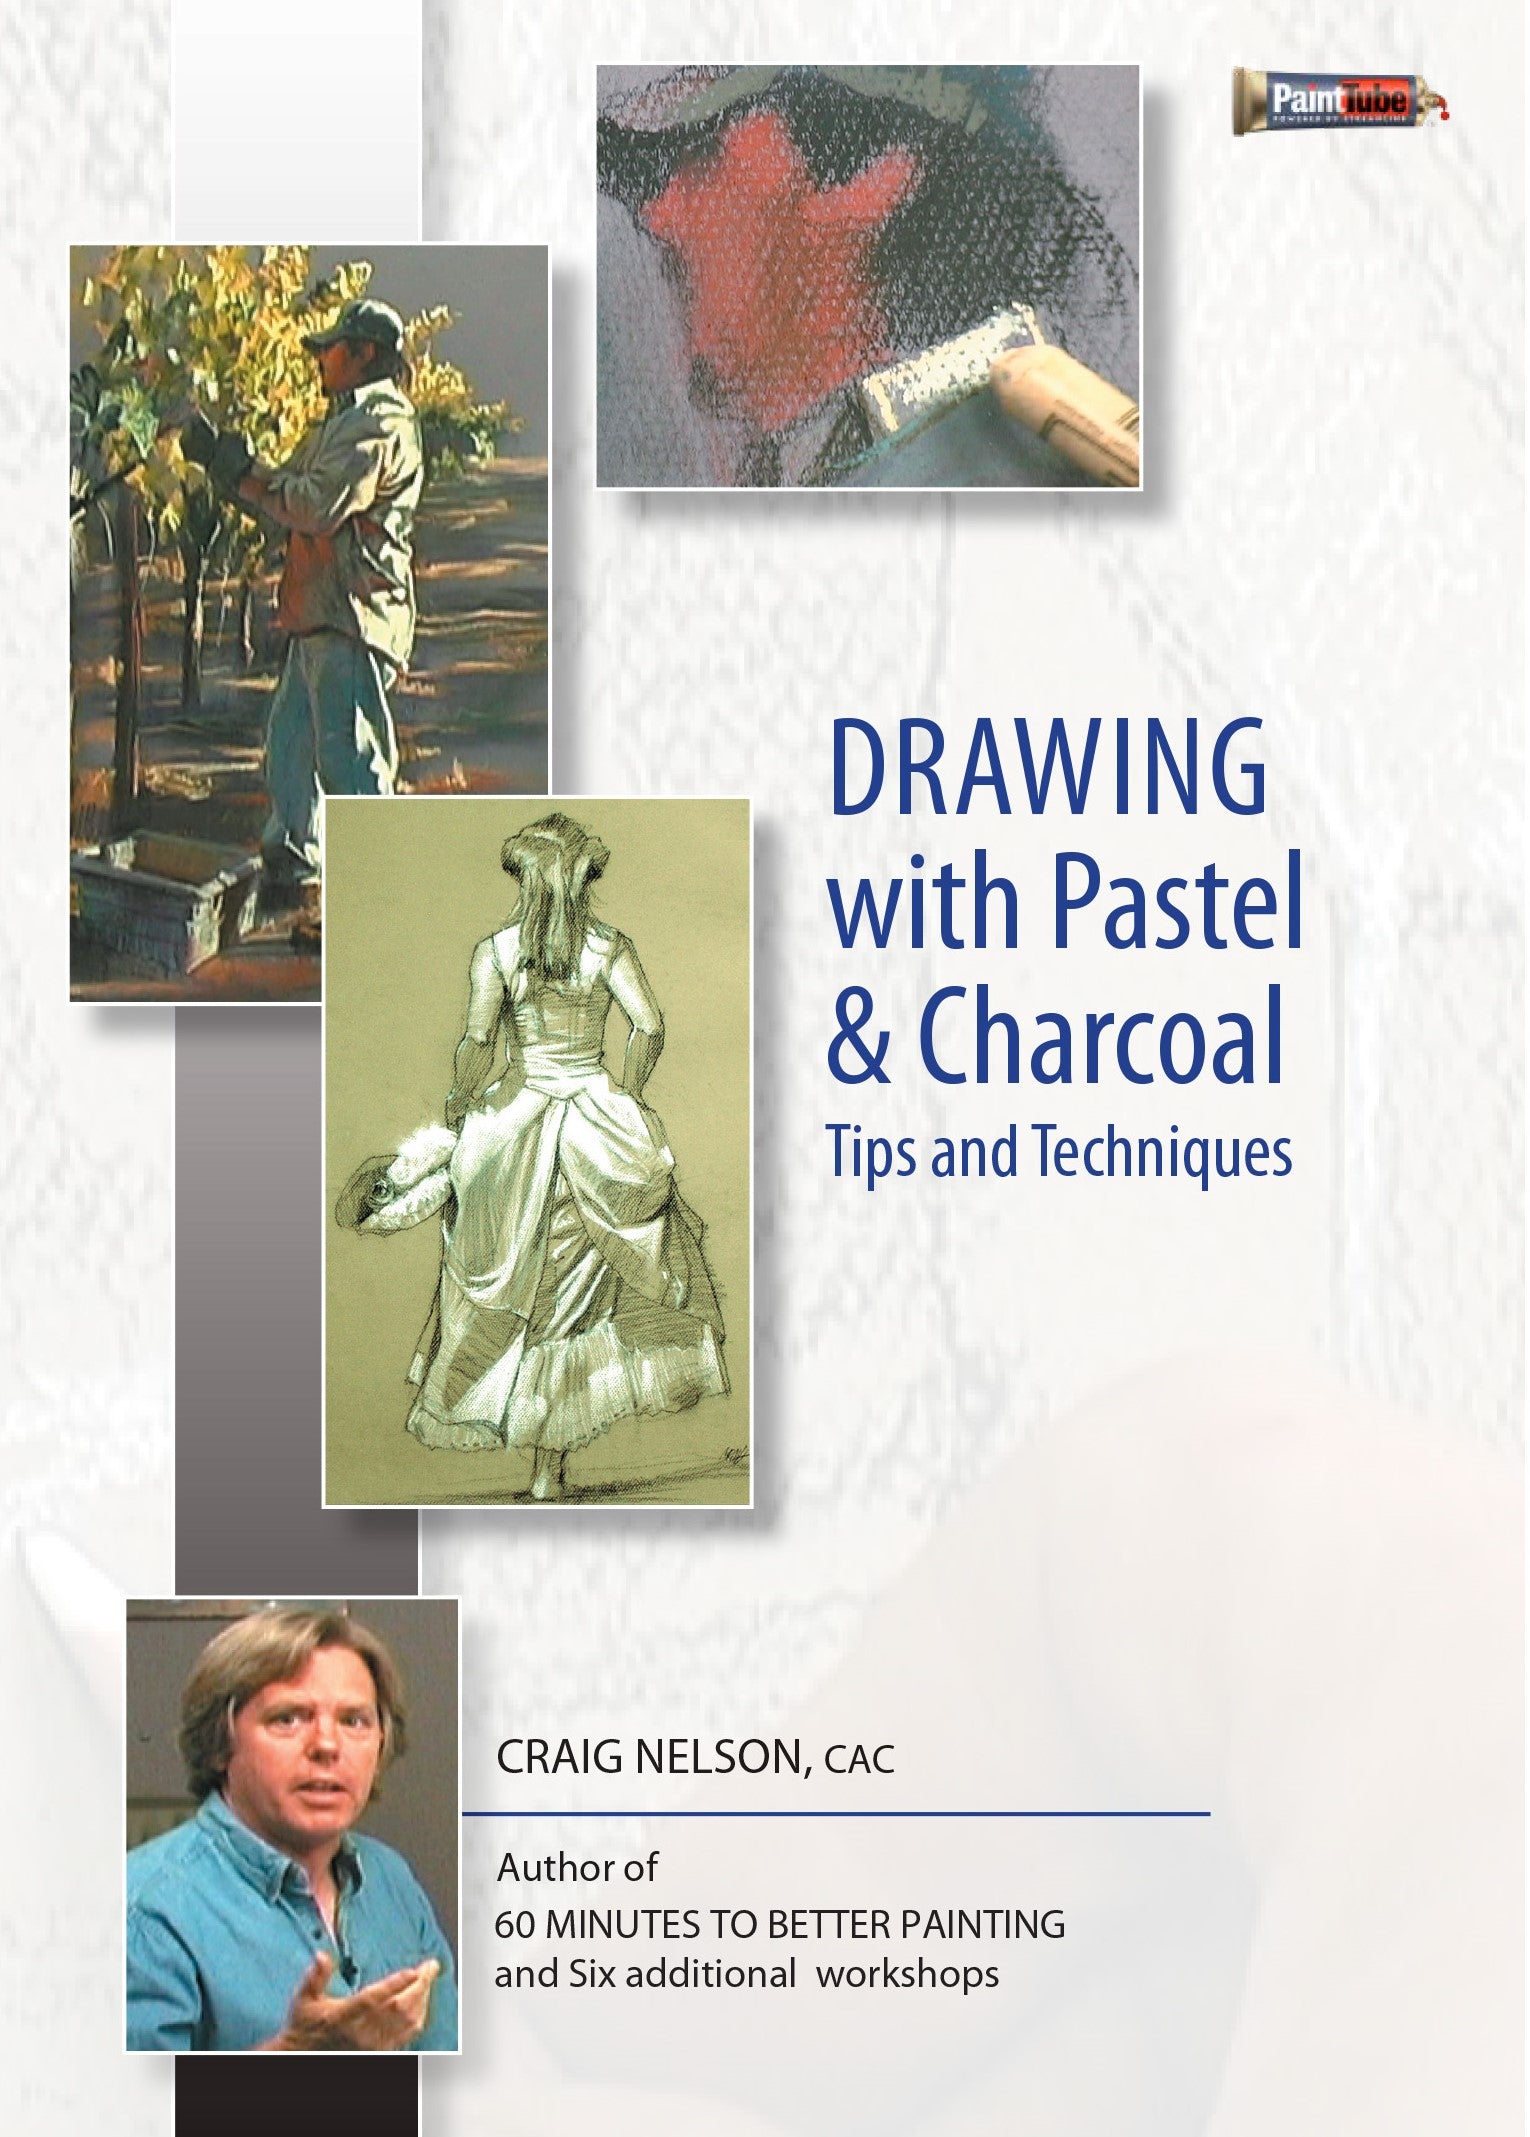 Craig Nelson: Drawing with Pastel and Charcoal - Tips and Techniques